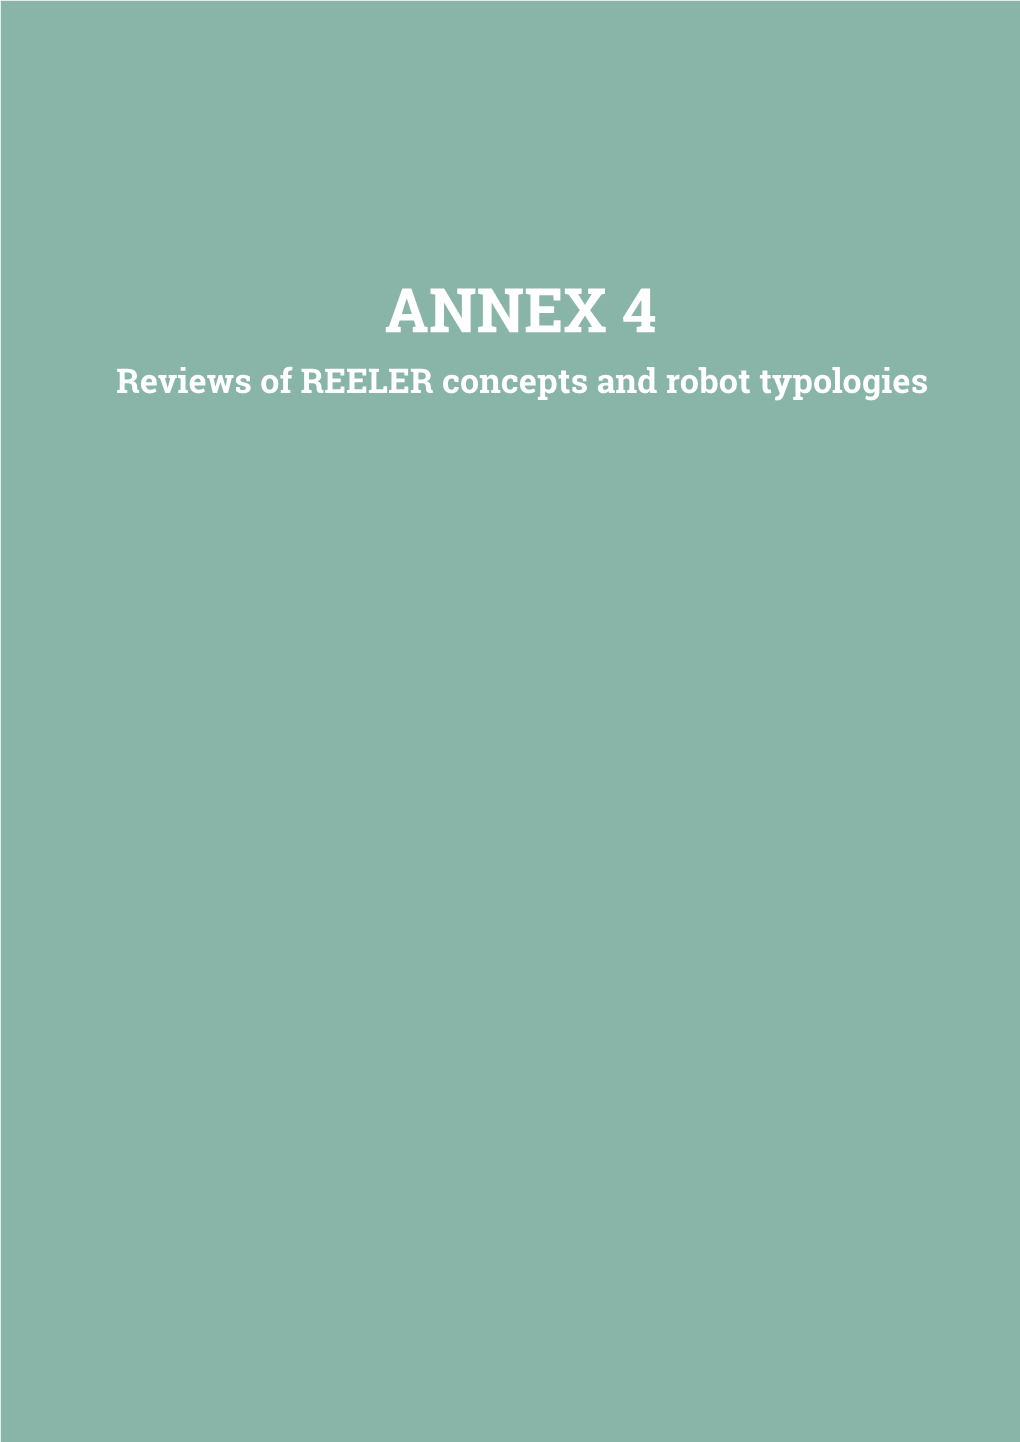 ANNEX 4 Reviews of REELER Concepts and Robot Typologies ANNEX 4: REVIEWS of REELER